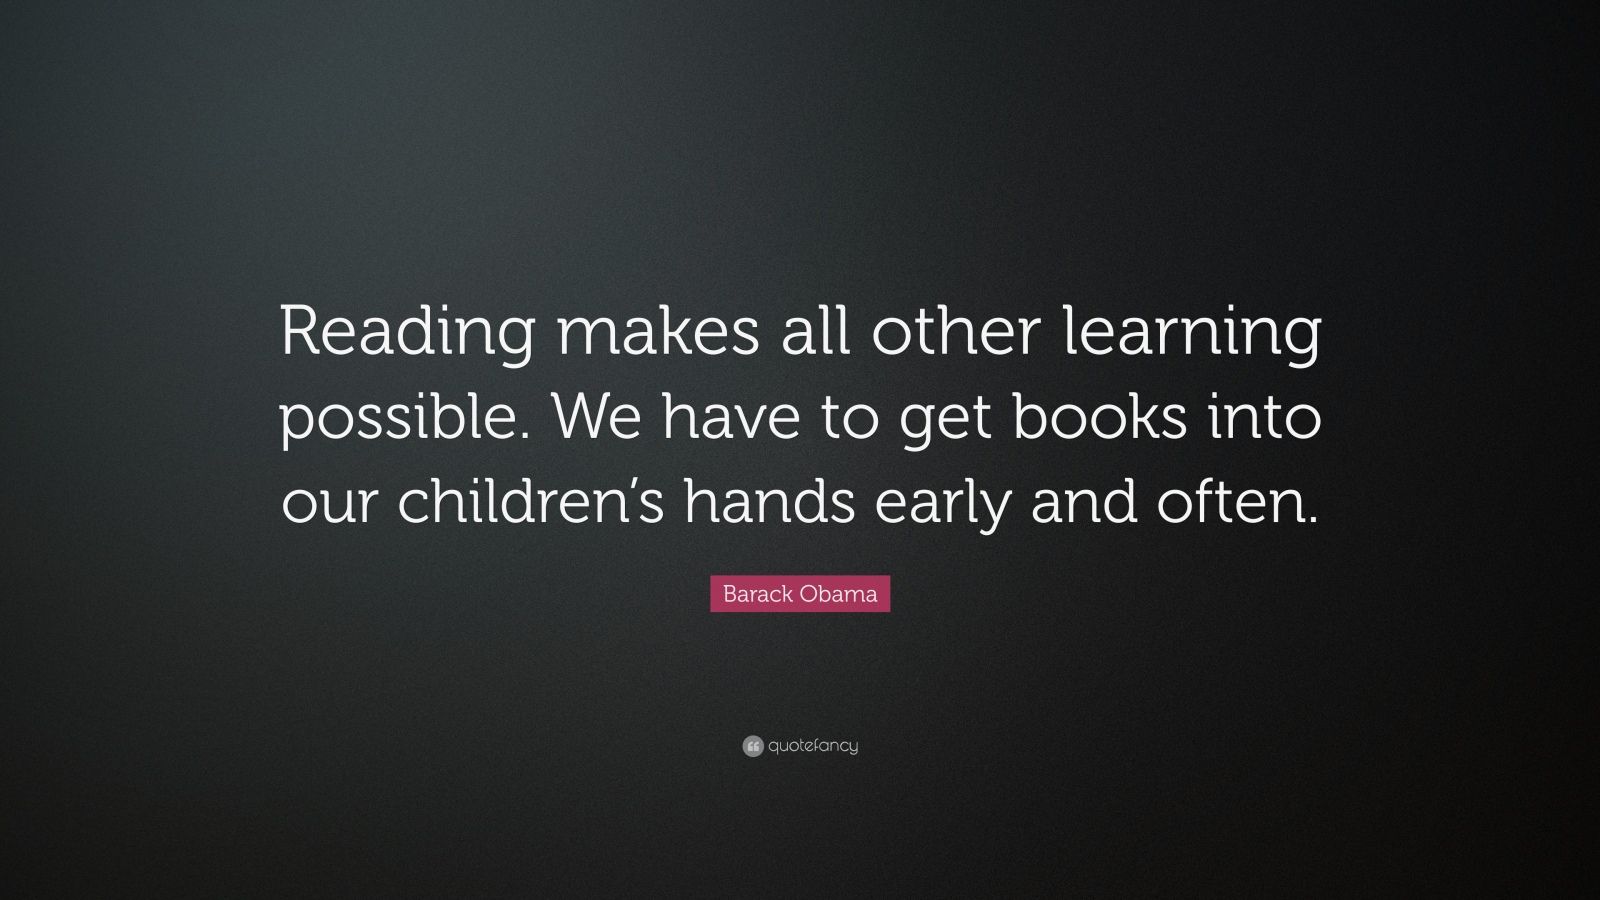 Barack Obama Quote: “Reading makes all other learning possible. We have